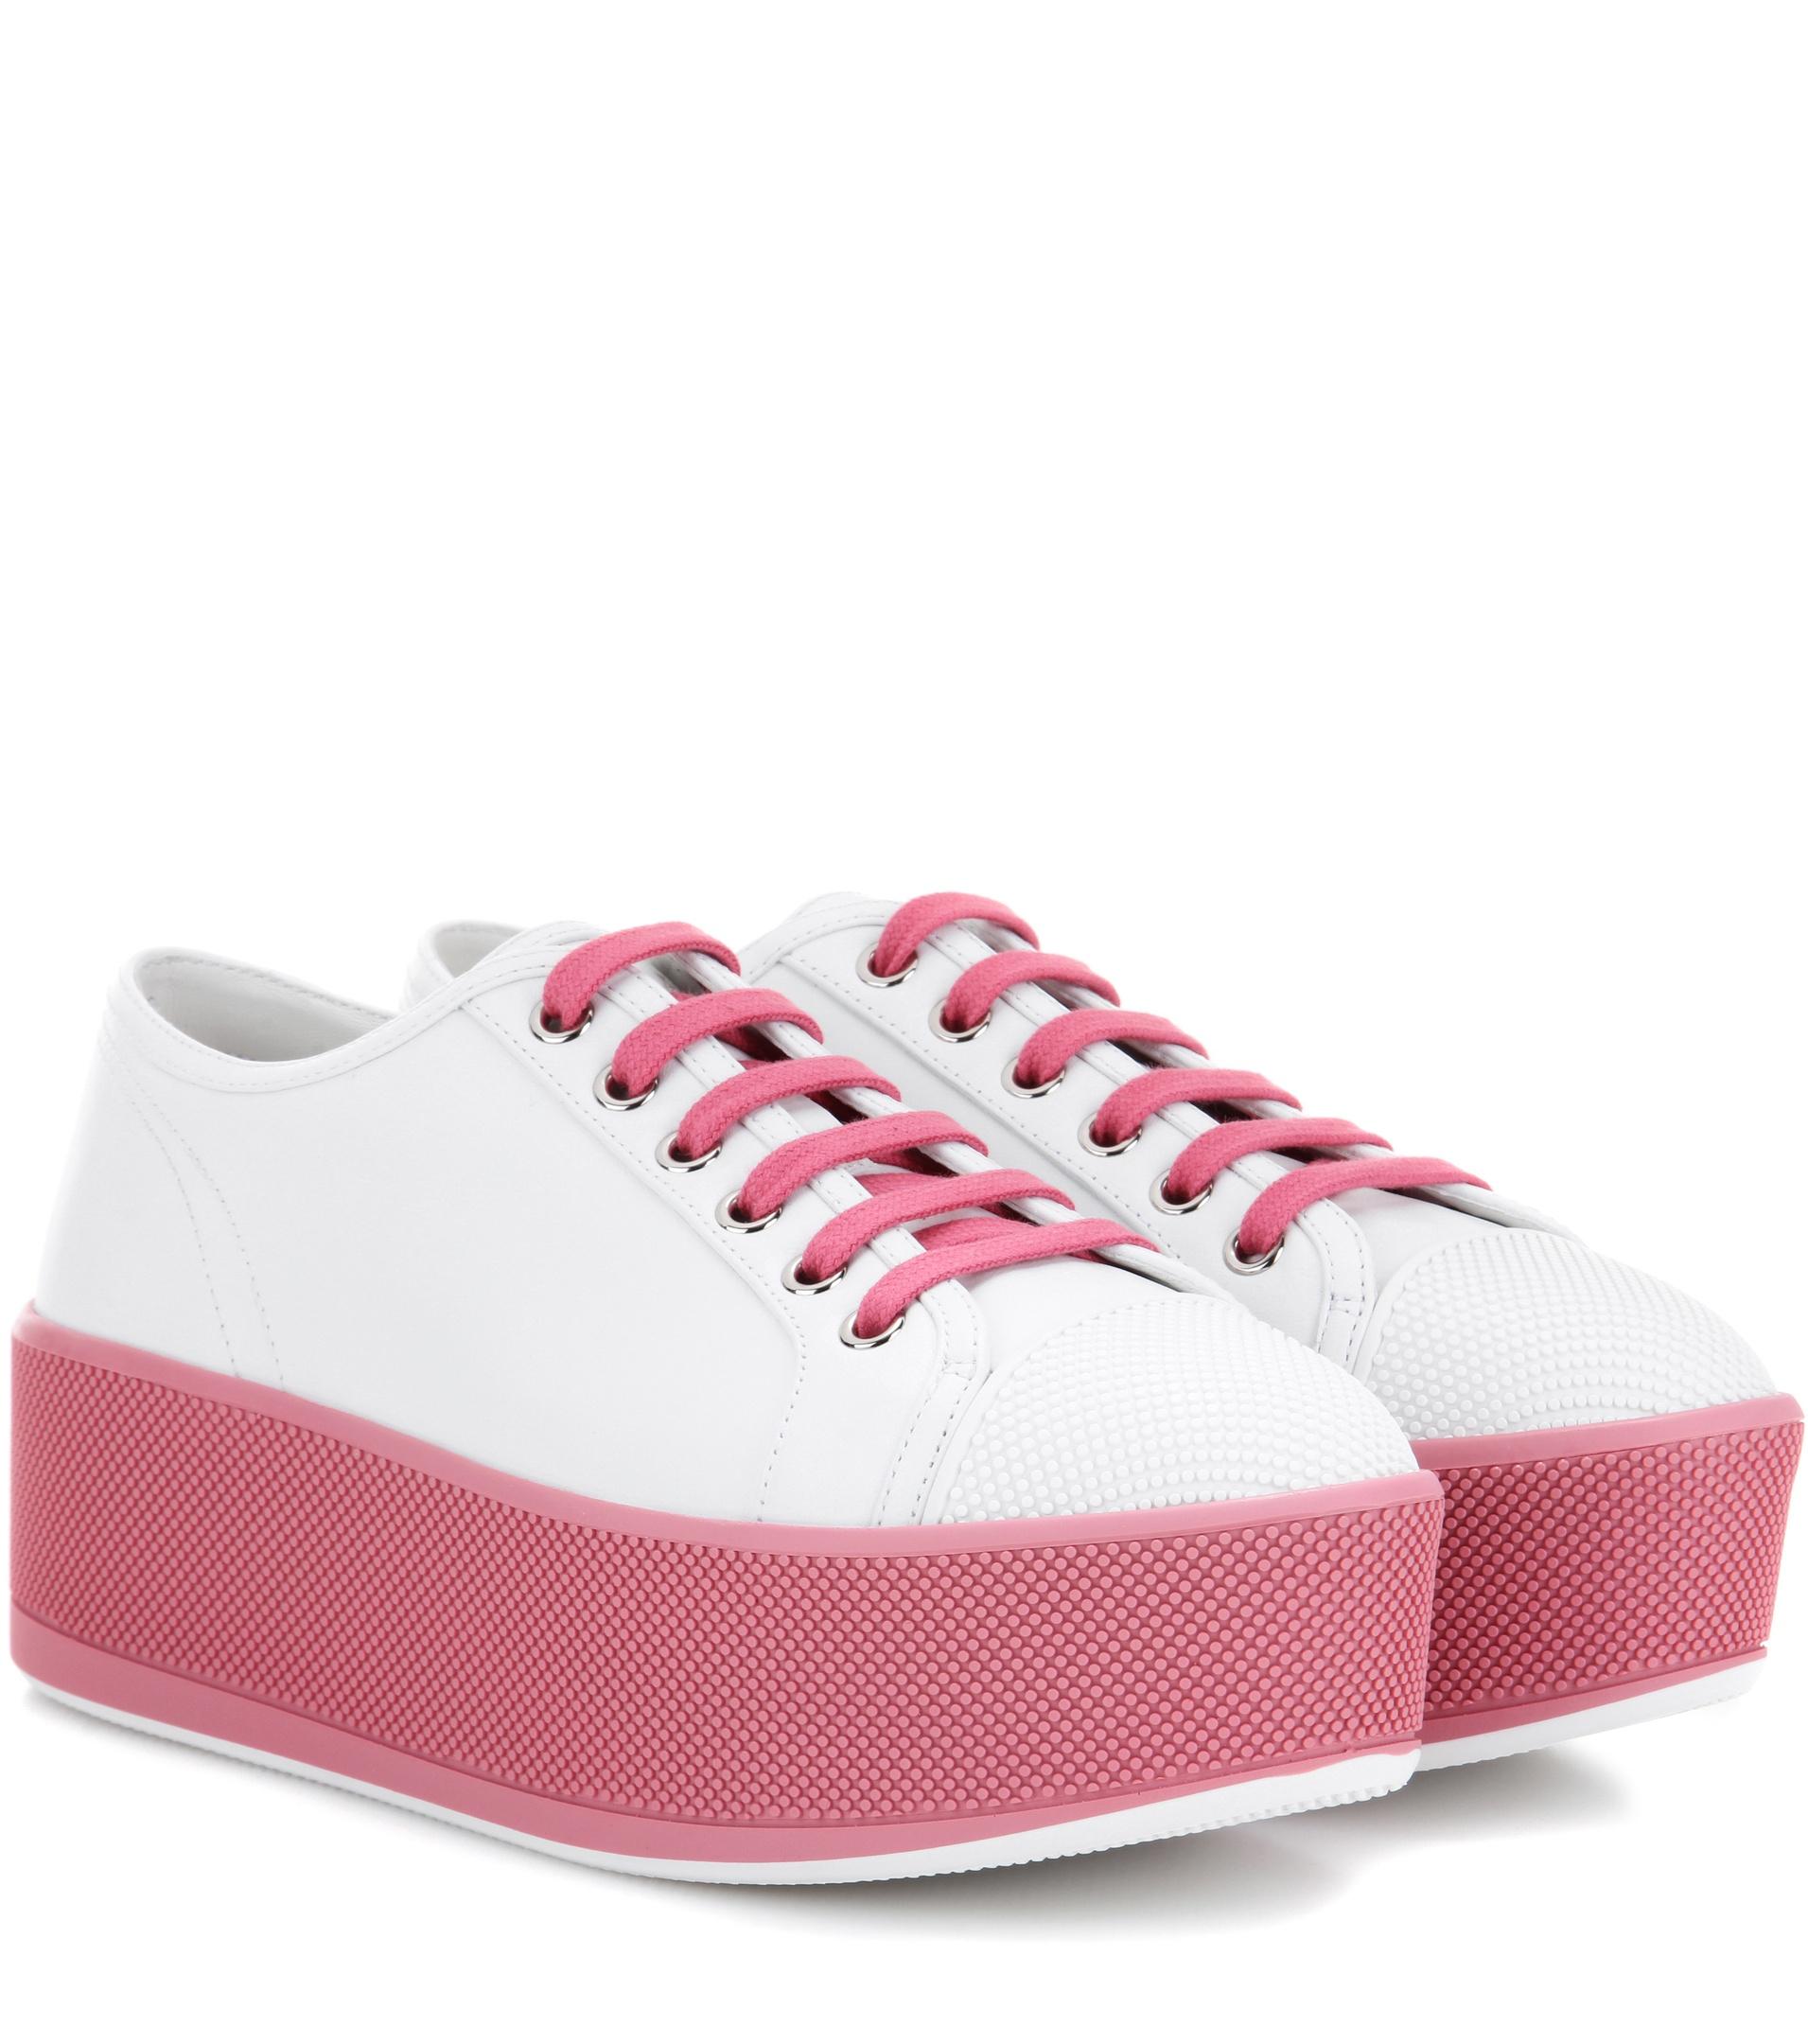 Prada Leather Sneakers in White - Lyst